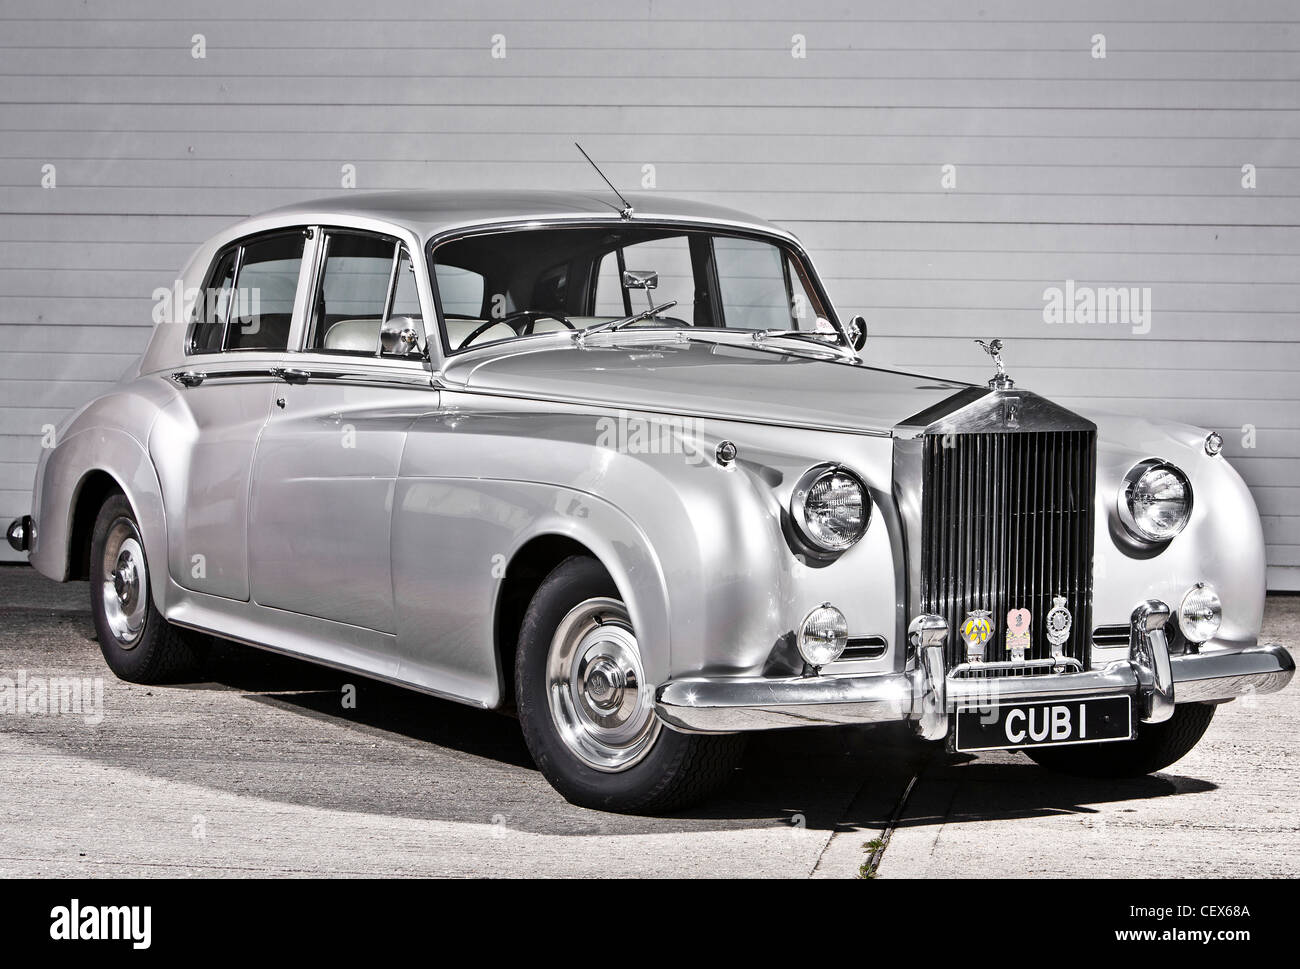 RollsRoyce Combines OldSchool Traditions With Contemporary Comforts and  Technology  Pasadena Magazine